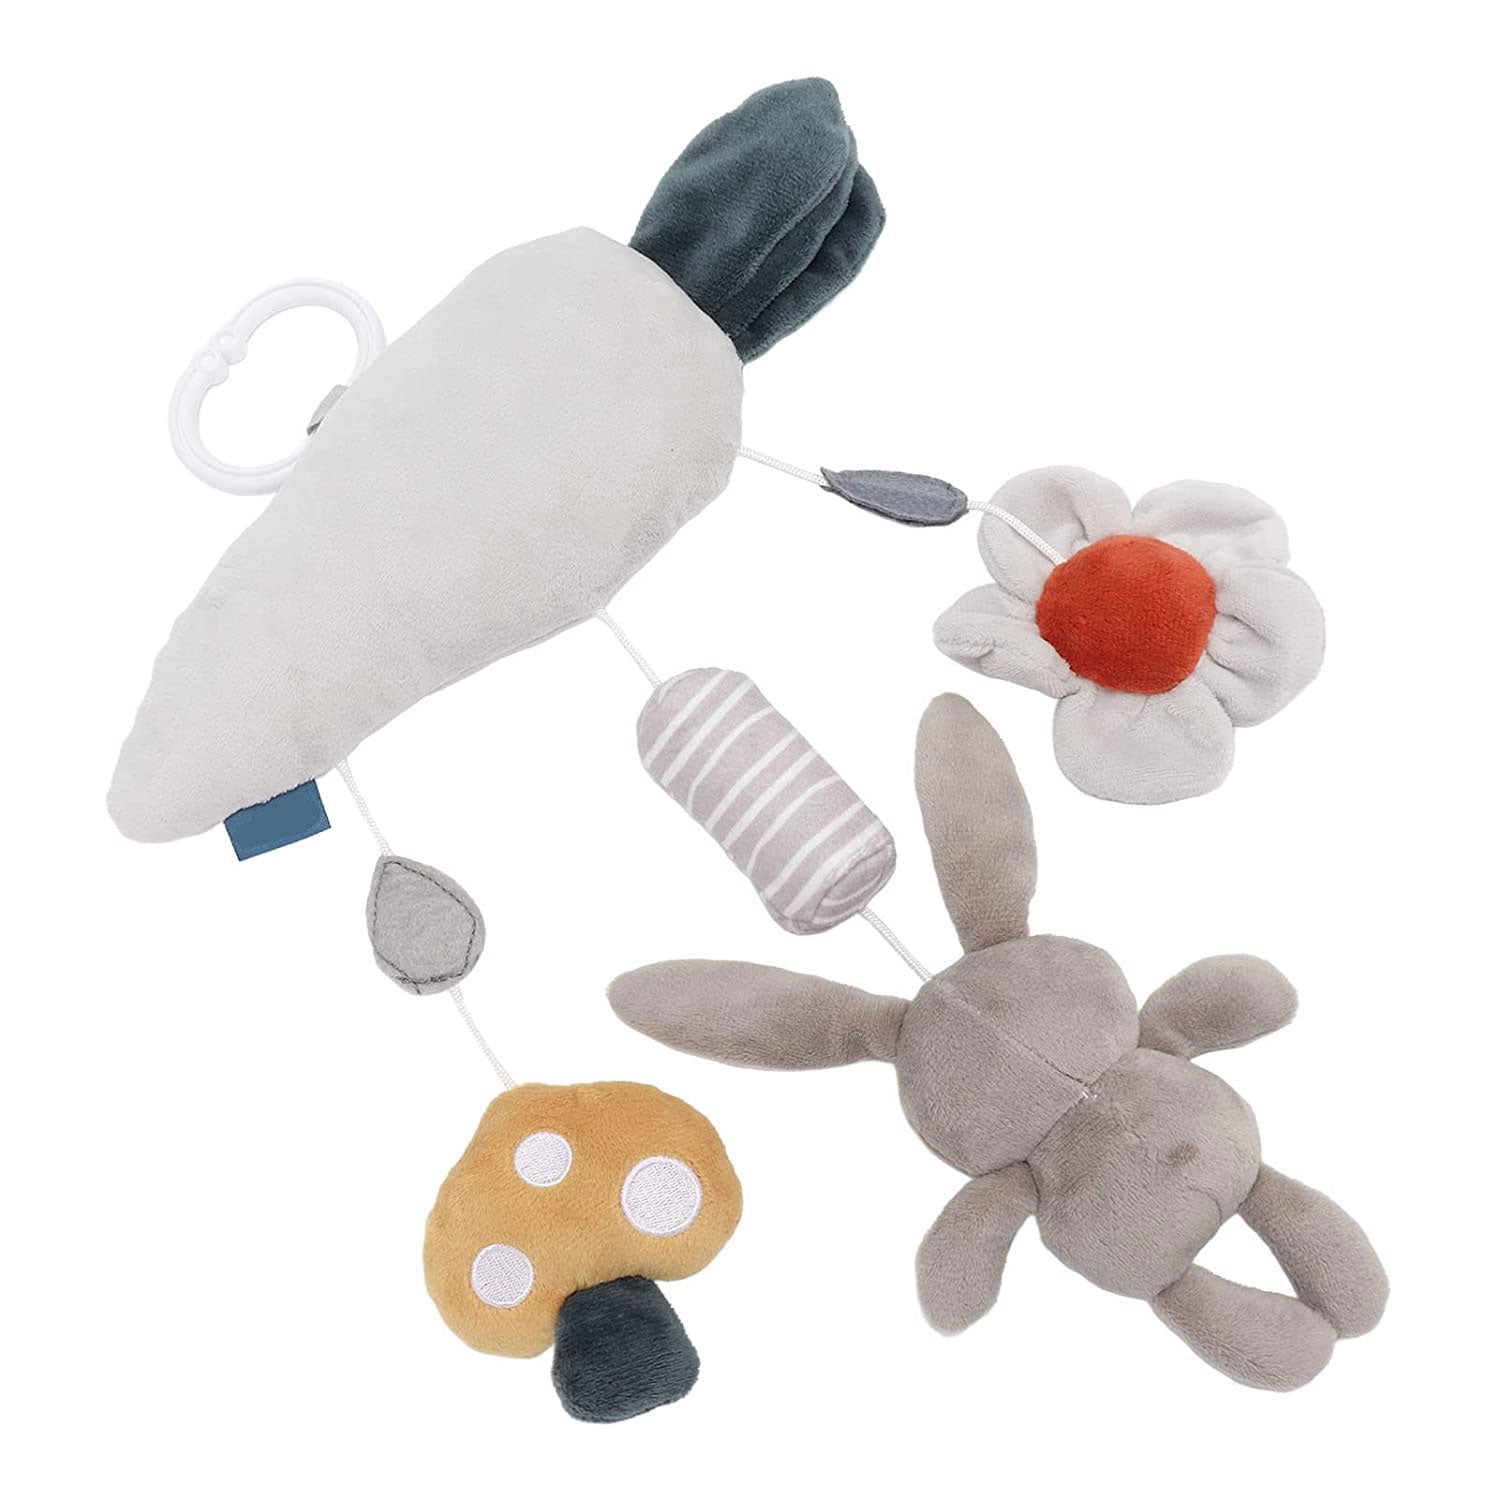 Baby Moo Bunny's Carrot Squeaker Wind Chime Hanging Musical Toy - Grey